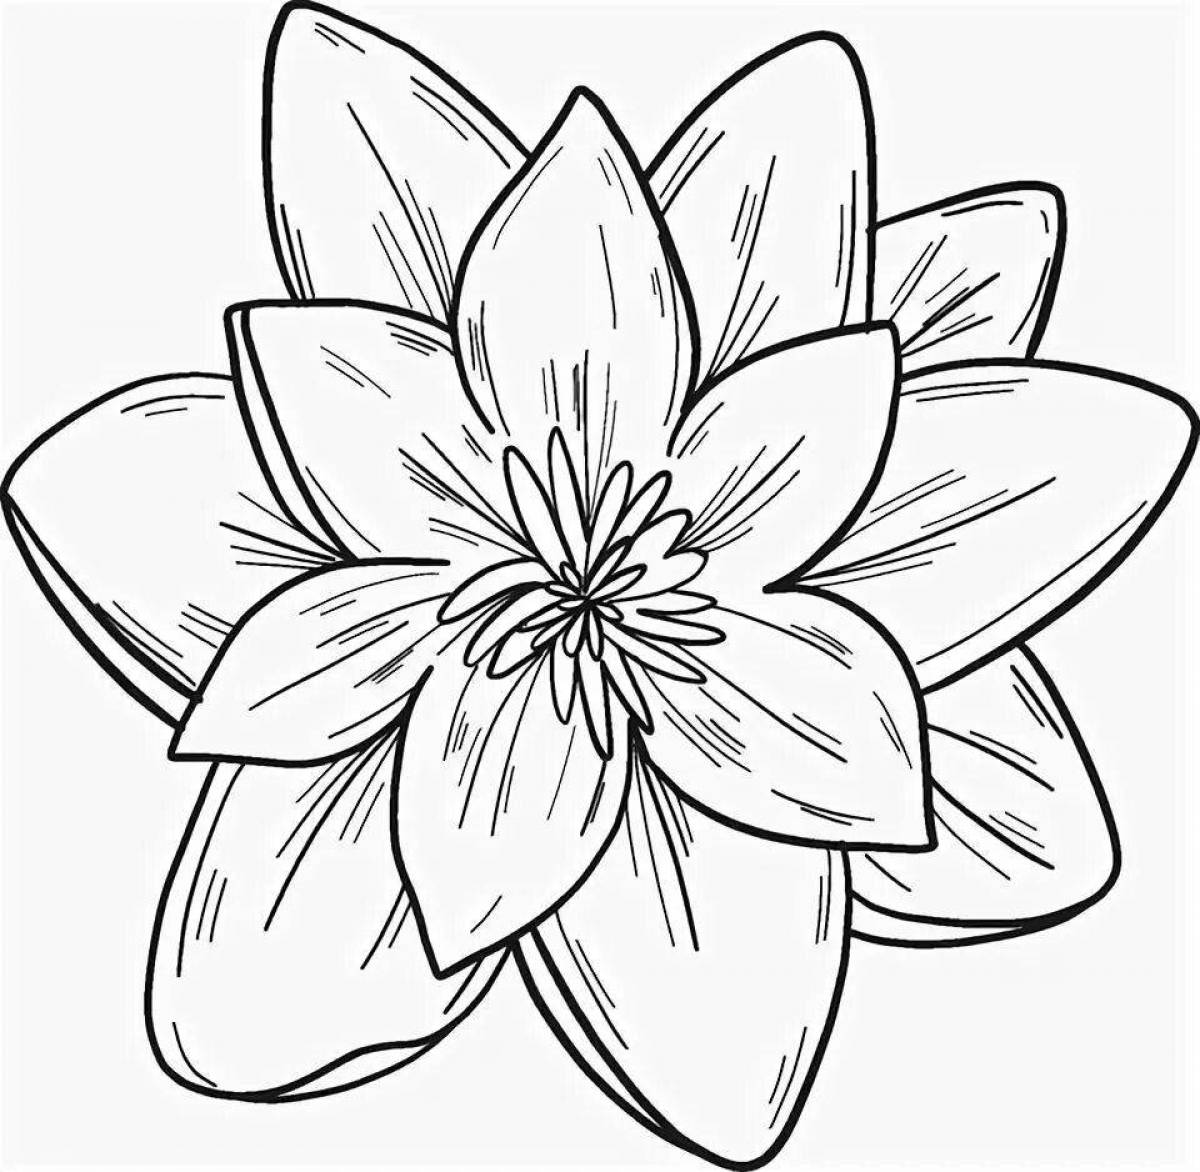 Magic lily coloring page